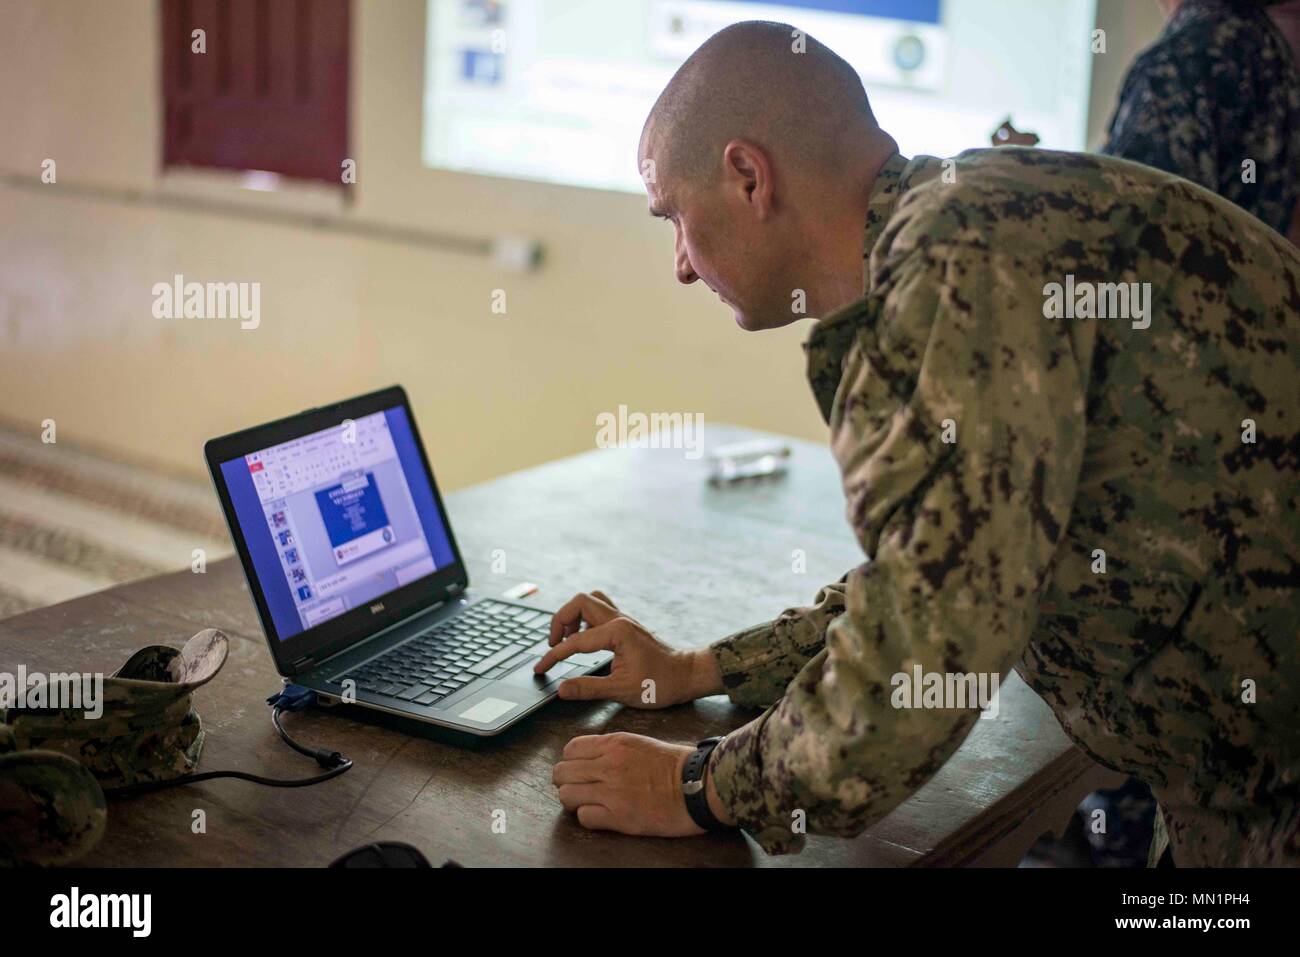 170808-N-KW679-0383 LA BOVEDA, Honduras (August 8, 2017) Lt. Cmdr. Ian Sutherland, the technical director for Navy Entomology Center of Excellence, prepares an entomology lecture during a Southern Partnership Station 17 subject matter expert exchange. SPS 17 is a U.S. Navy deployment, executed by U.S. Naval Forces Southern Command/U.S. 4th Fleet, focused on subject matter expert exchanges with partner nation militaries and security forces in Central and South America. (U.S. Navy photo by Mass Communication Specialist 3rd Class Kristen Cheyenne Yarber) Stock Photo